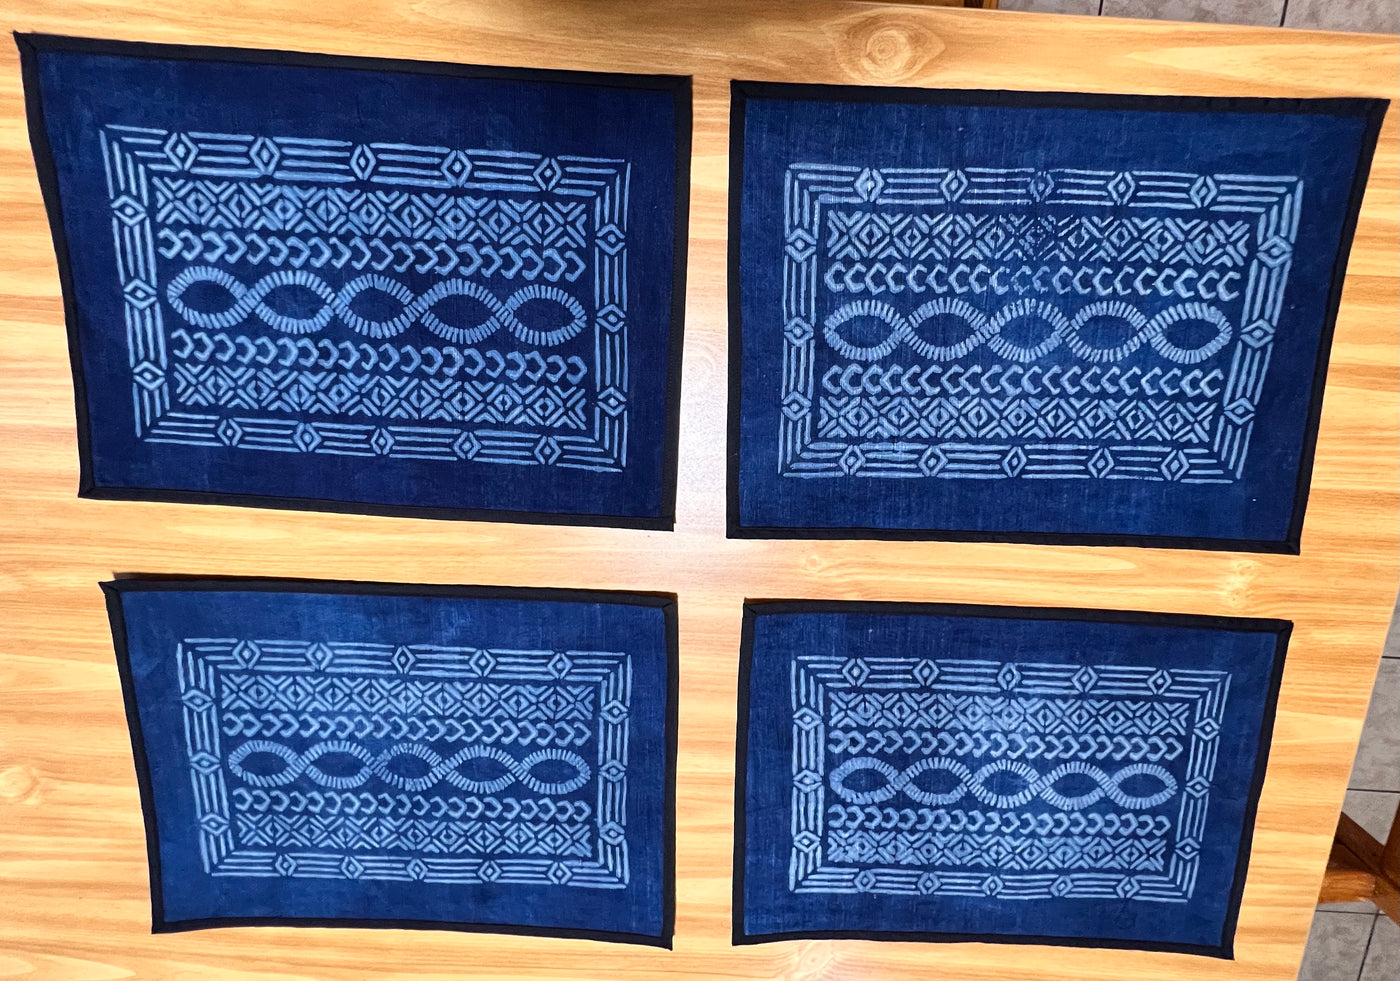 "Malian Indigo Placemats - Handcrafted Heritage at Your Table"